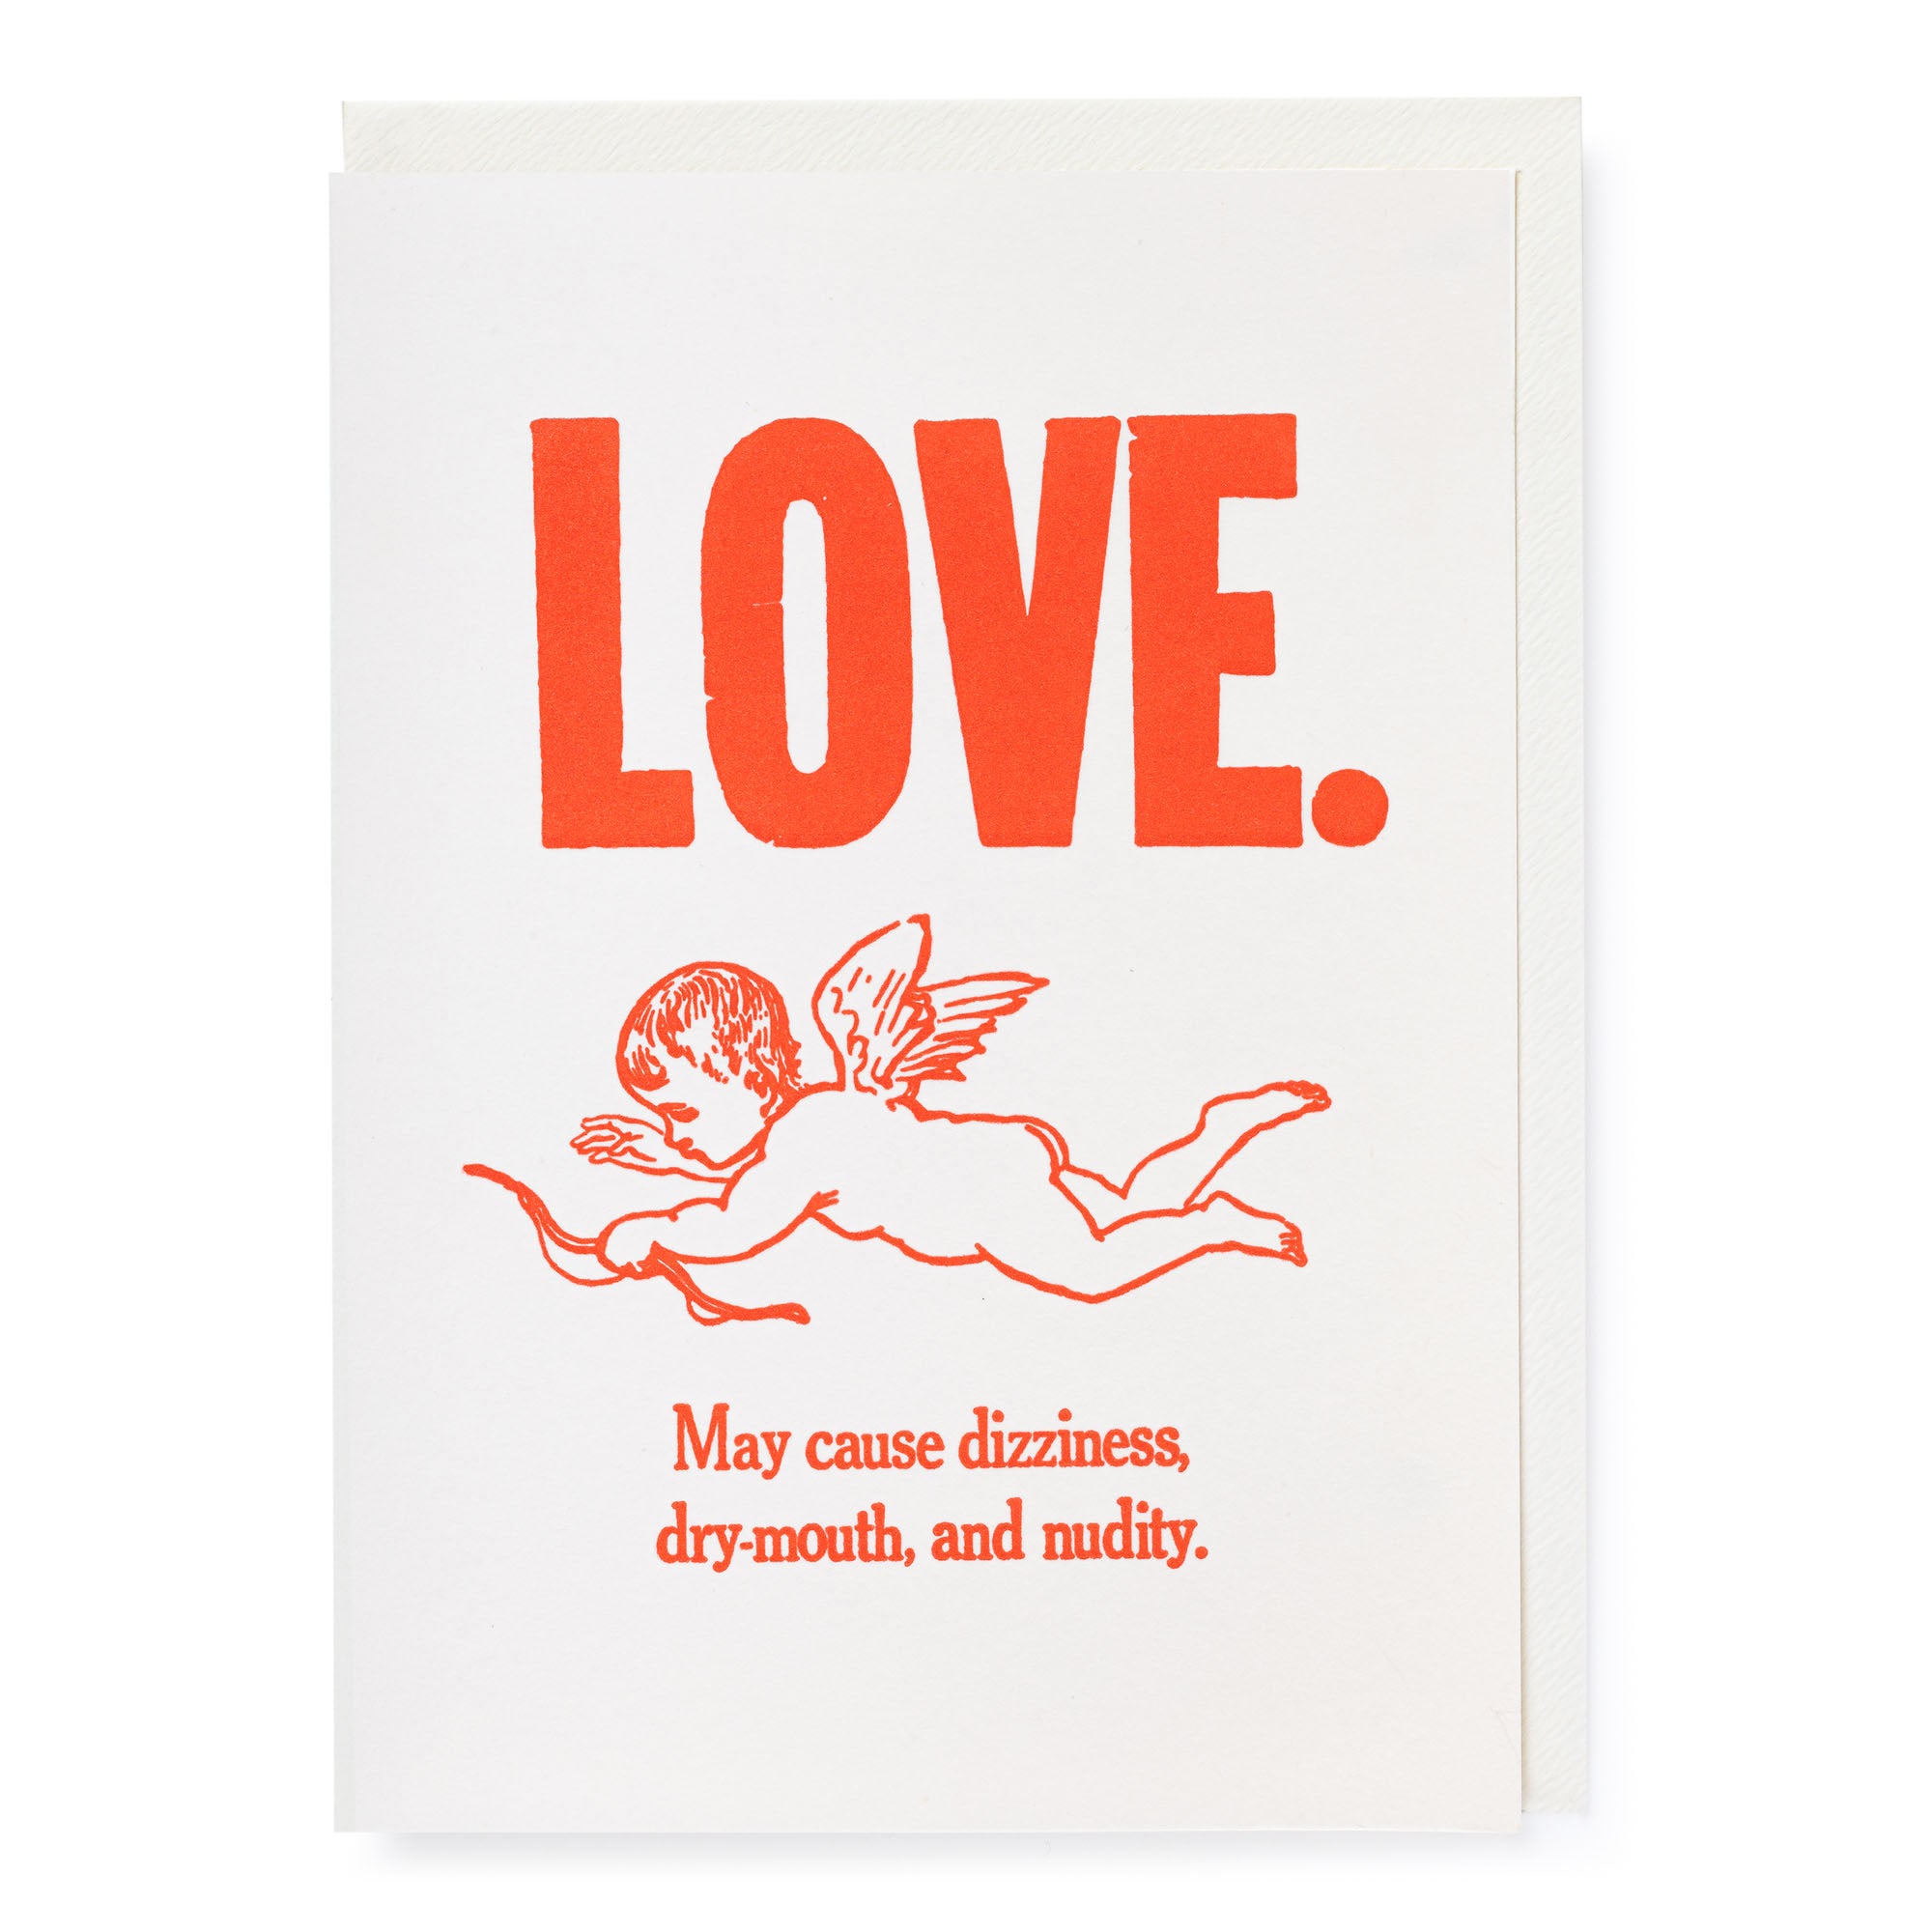 Love and nudity card